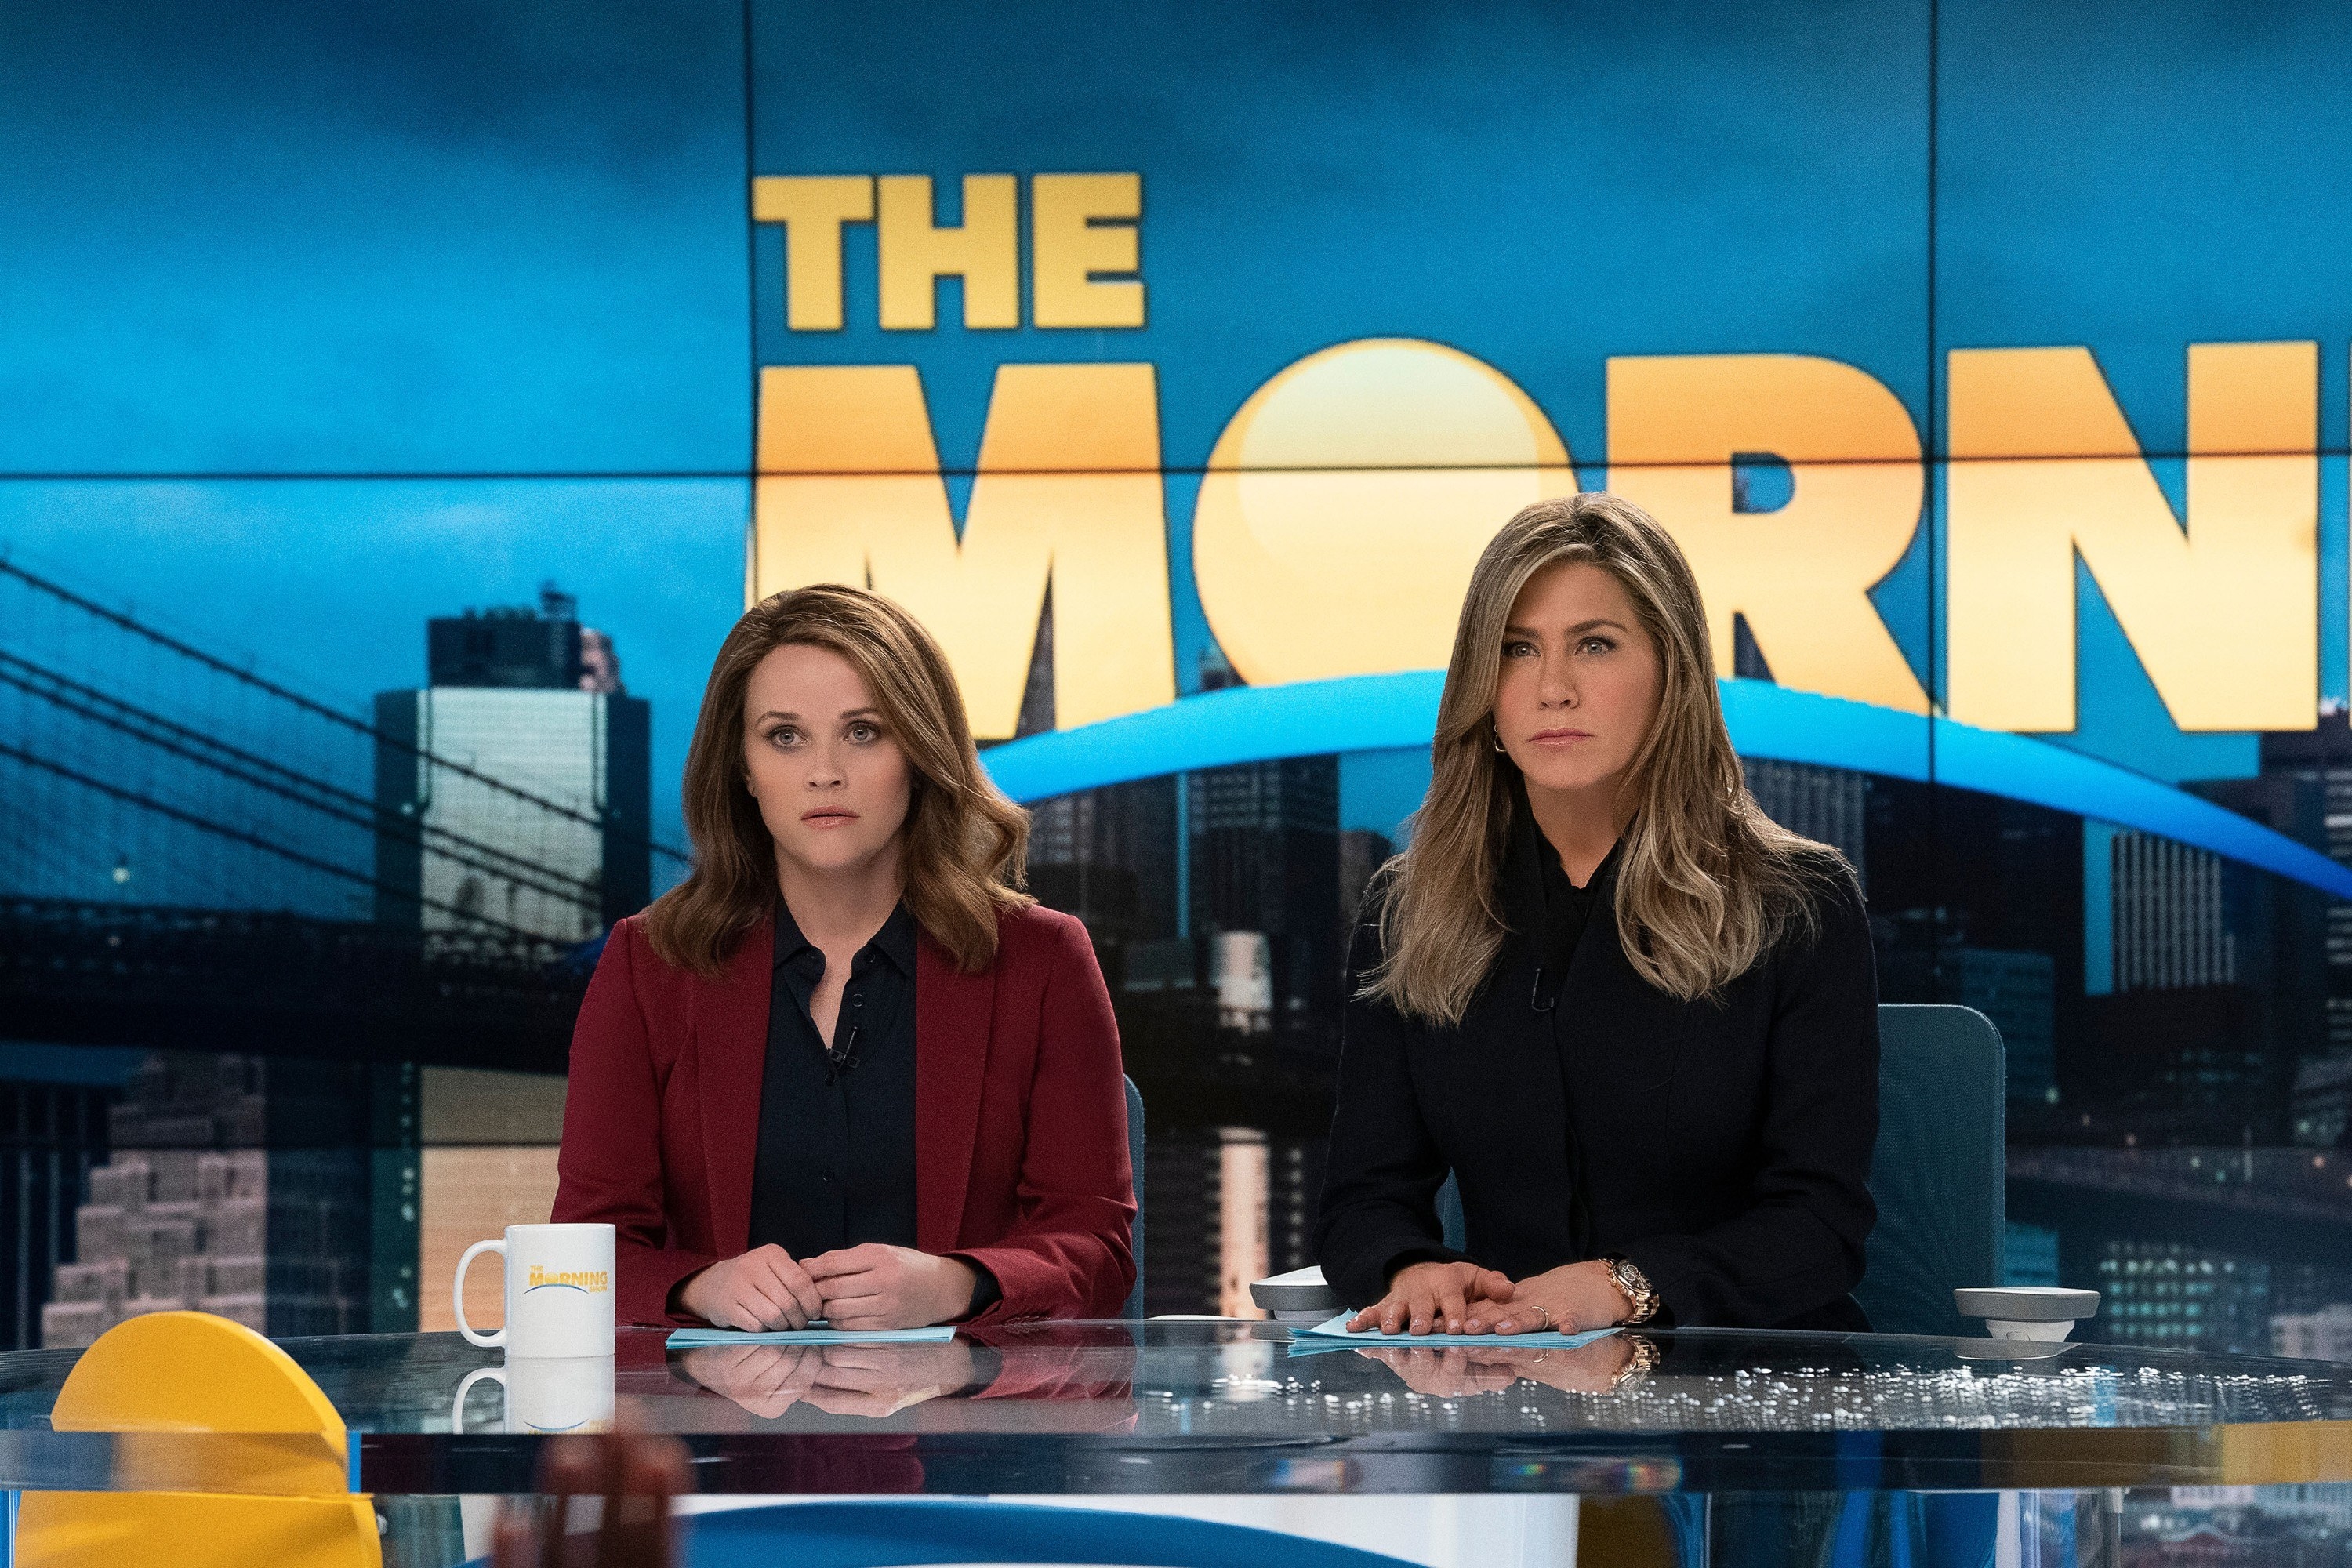 Reese and Jennifer&#x27;s characters sit behind the anchor desk